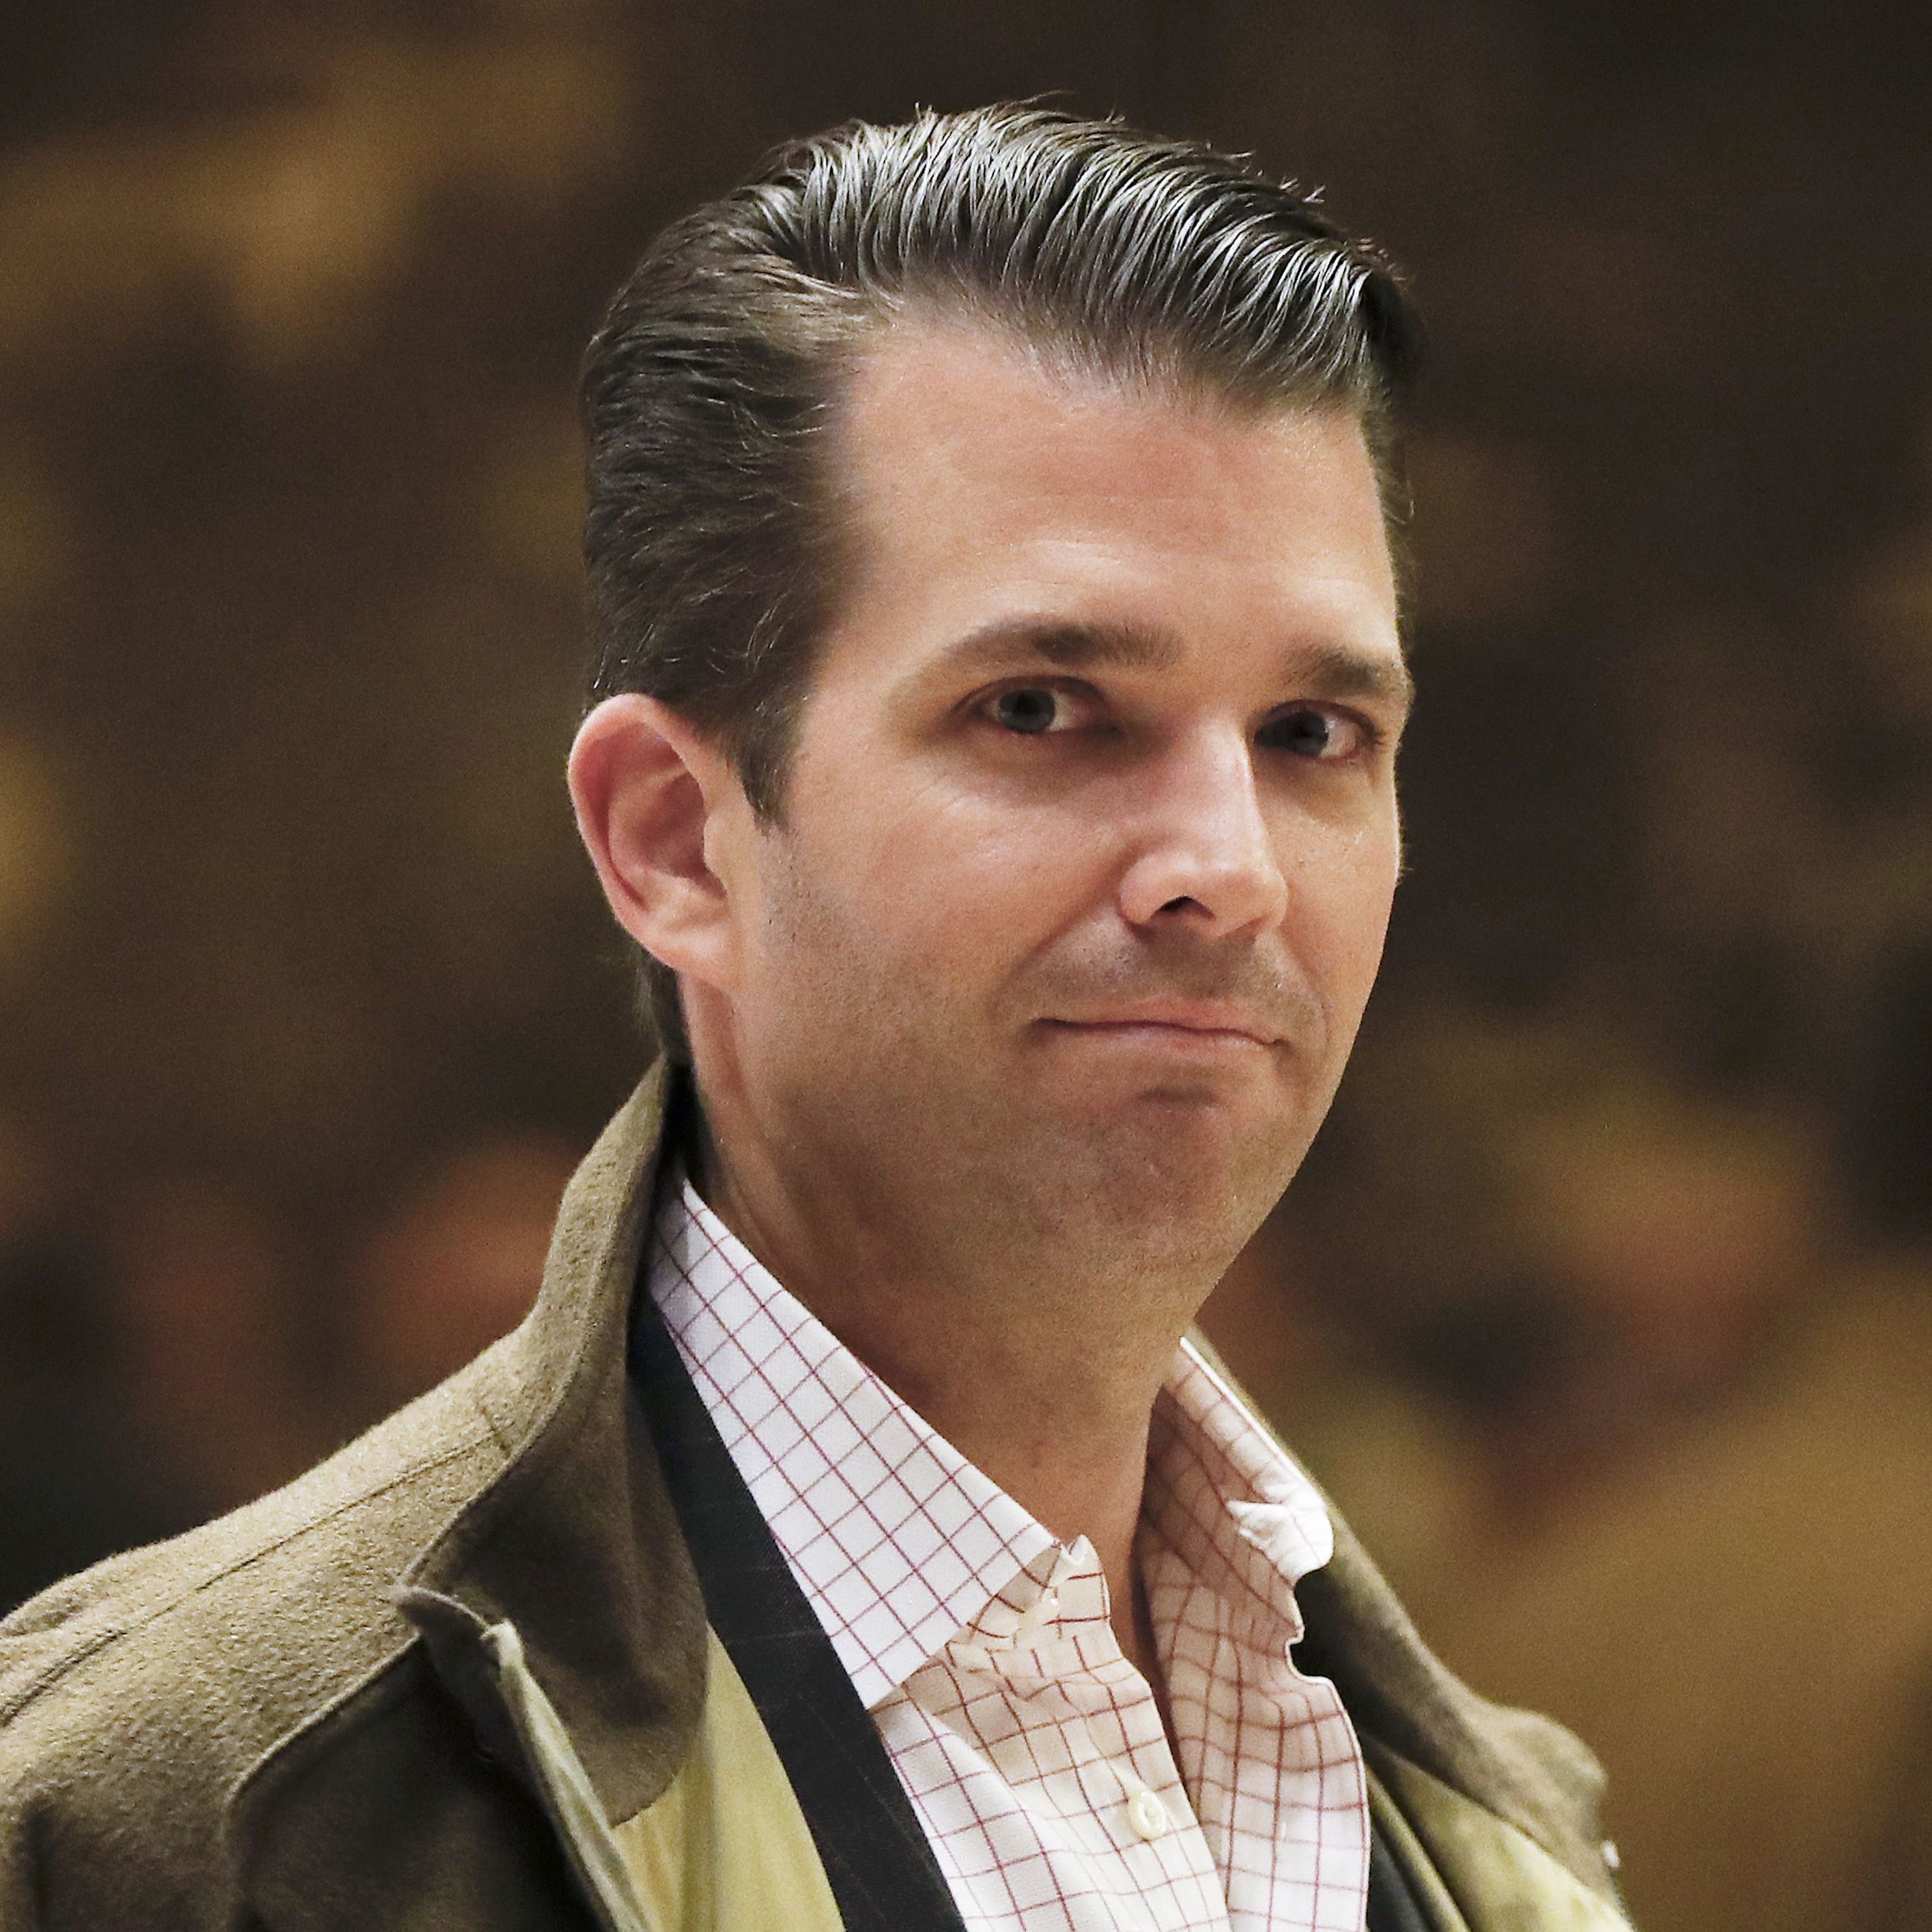 In a Wednesday, Nov. 16, 2016 file photo, Donald Trump Jr., son of President-elect Donald Trump, walks from the elevator at Trump Tower, in New York. Donald Trump Jr. told the Senate Judiciary Committee that he couldn't remember whether he had discus